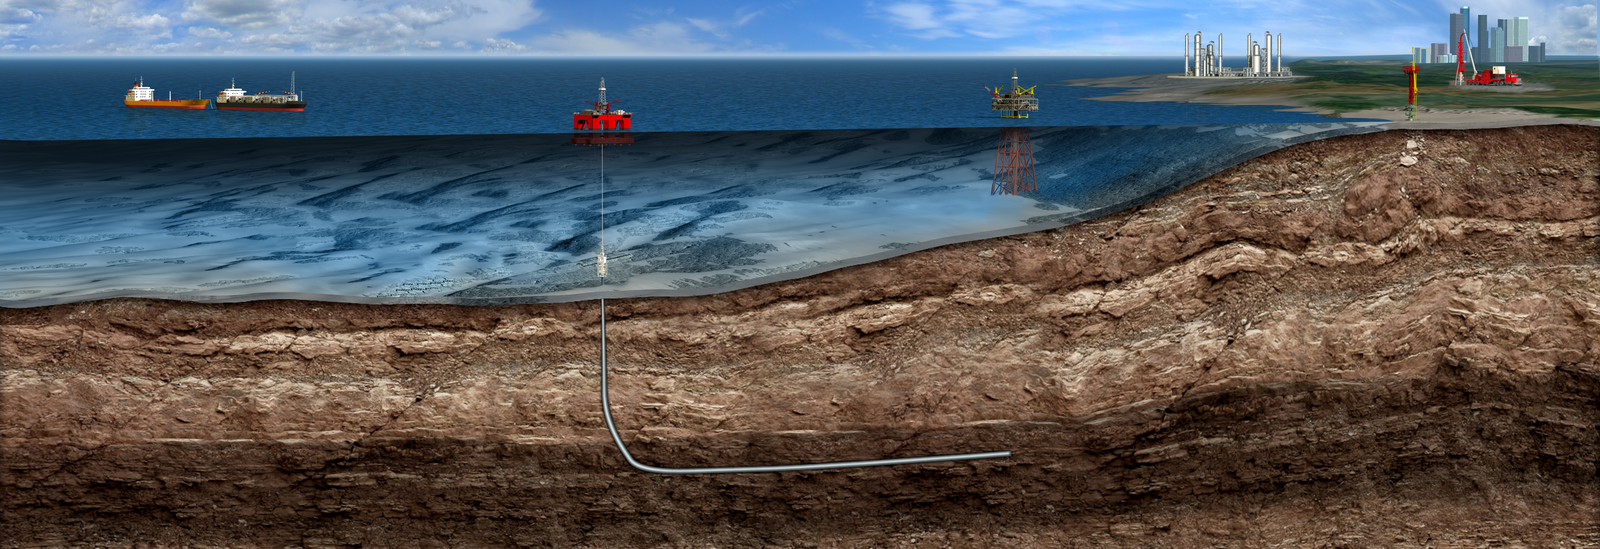 Veto™ Subsea Safety Systems